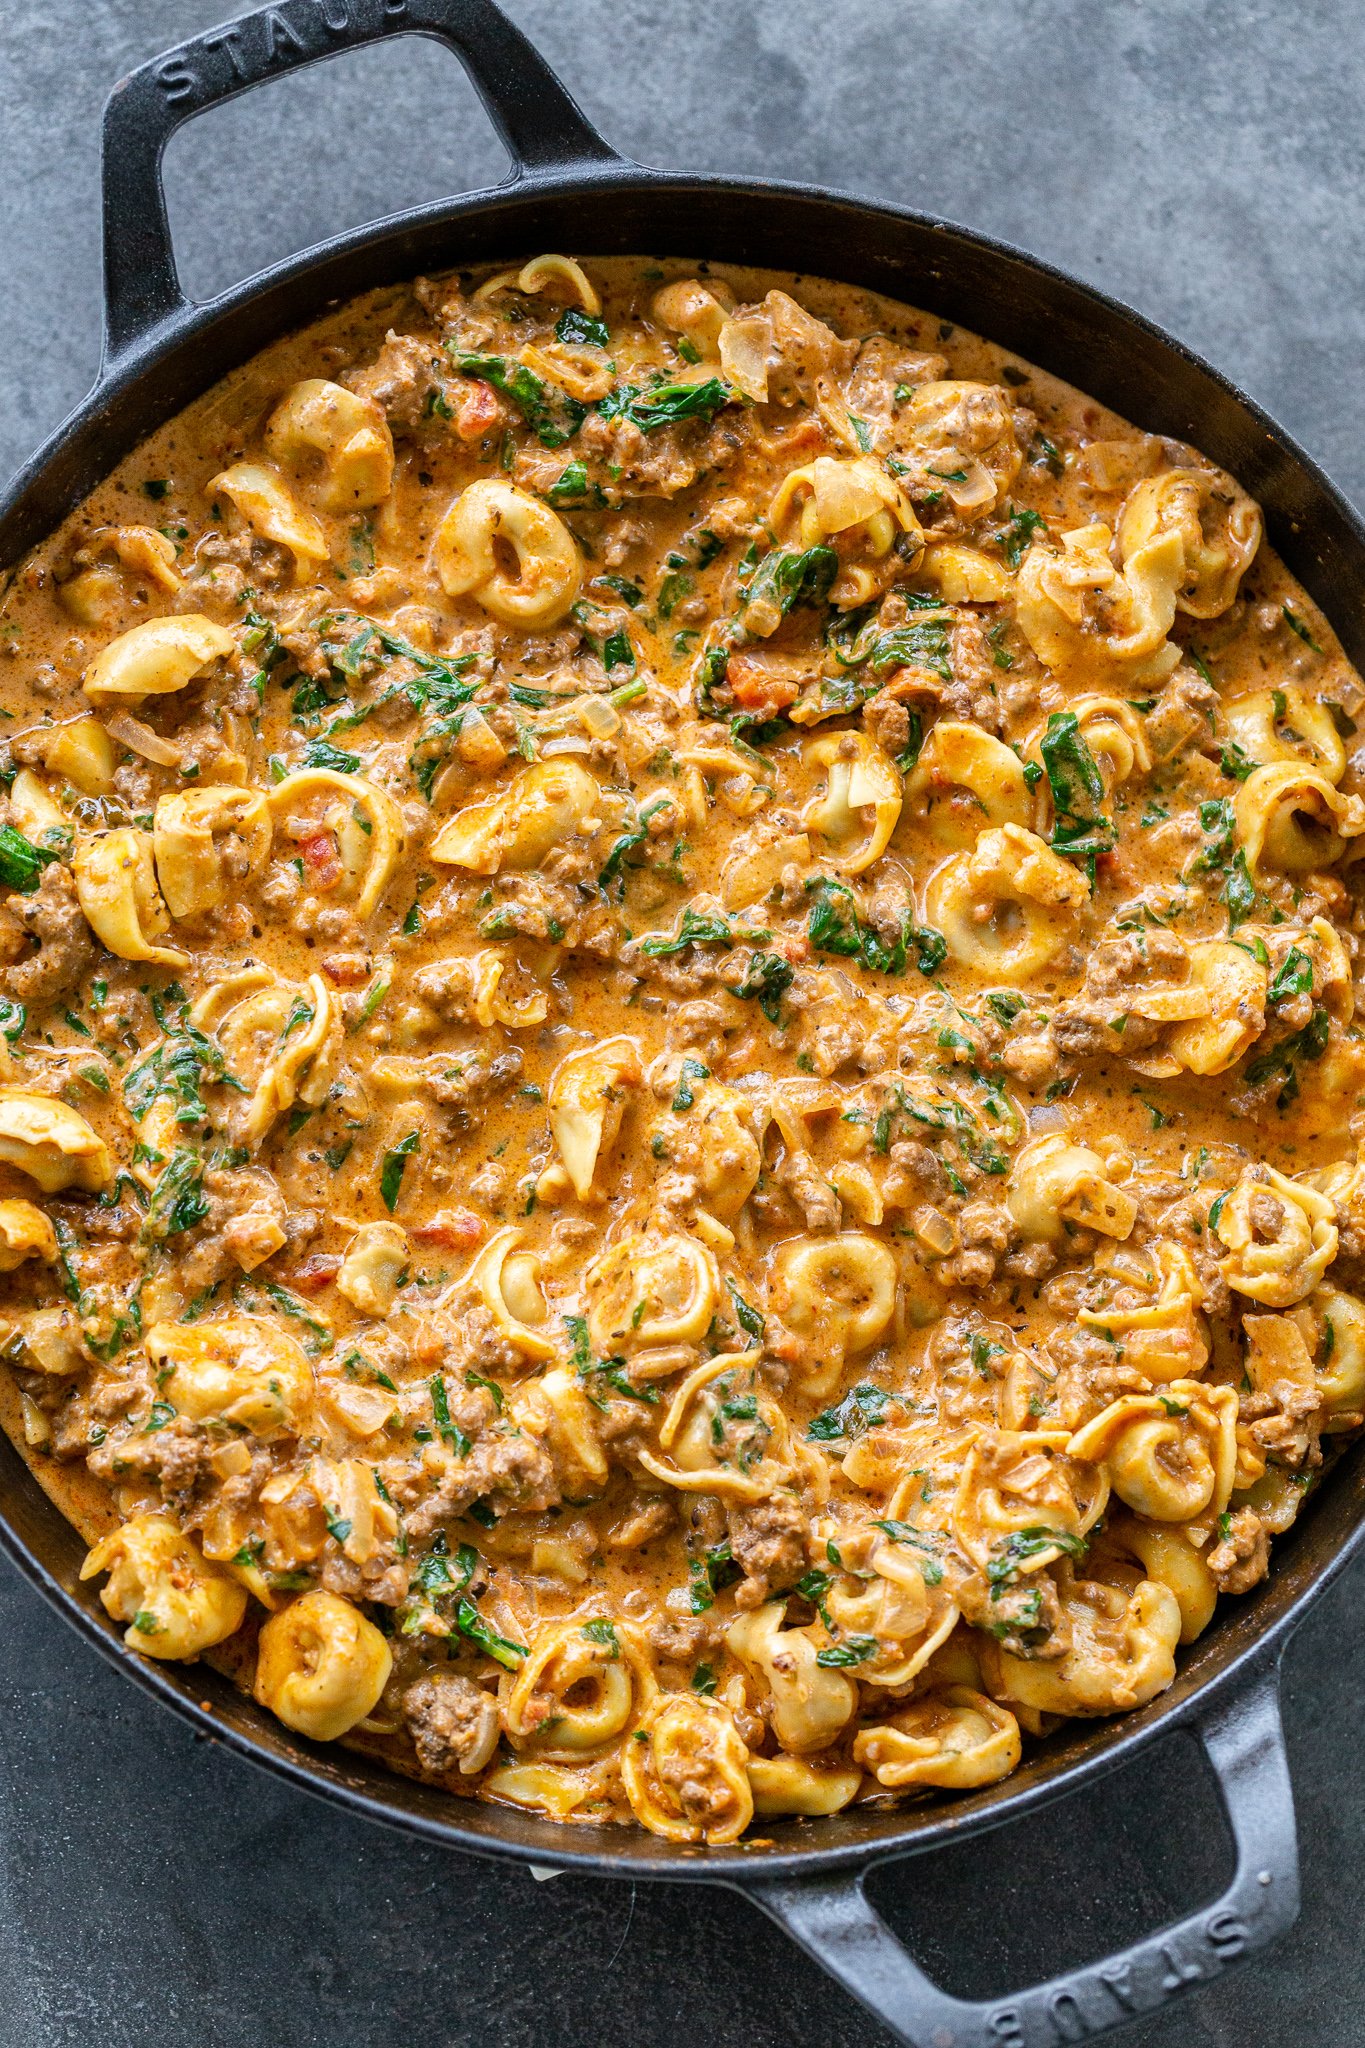 Homemade Tortellini Pasta Recipe with Meat Filling